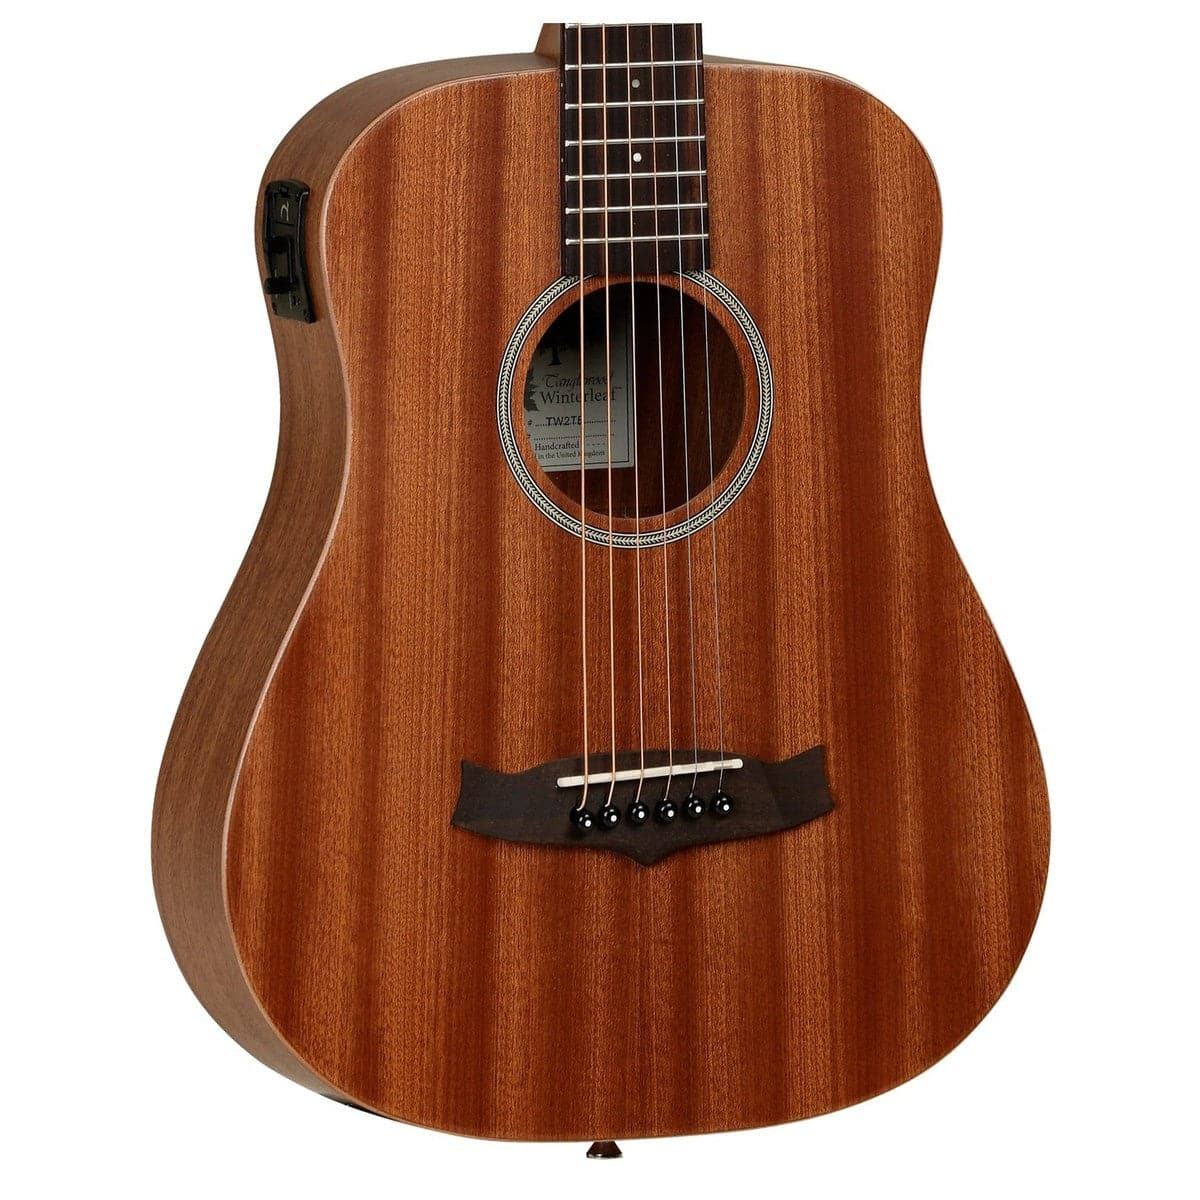 Tanglewood TW2-TE Winterleaf Travel Electro Acoustic Guitar - Natural with Gig Bag